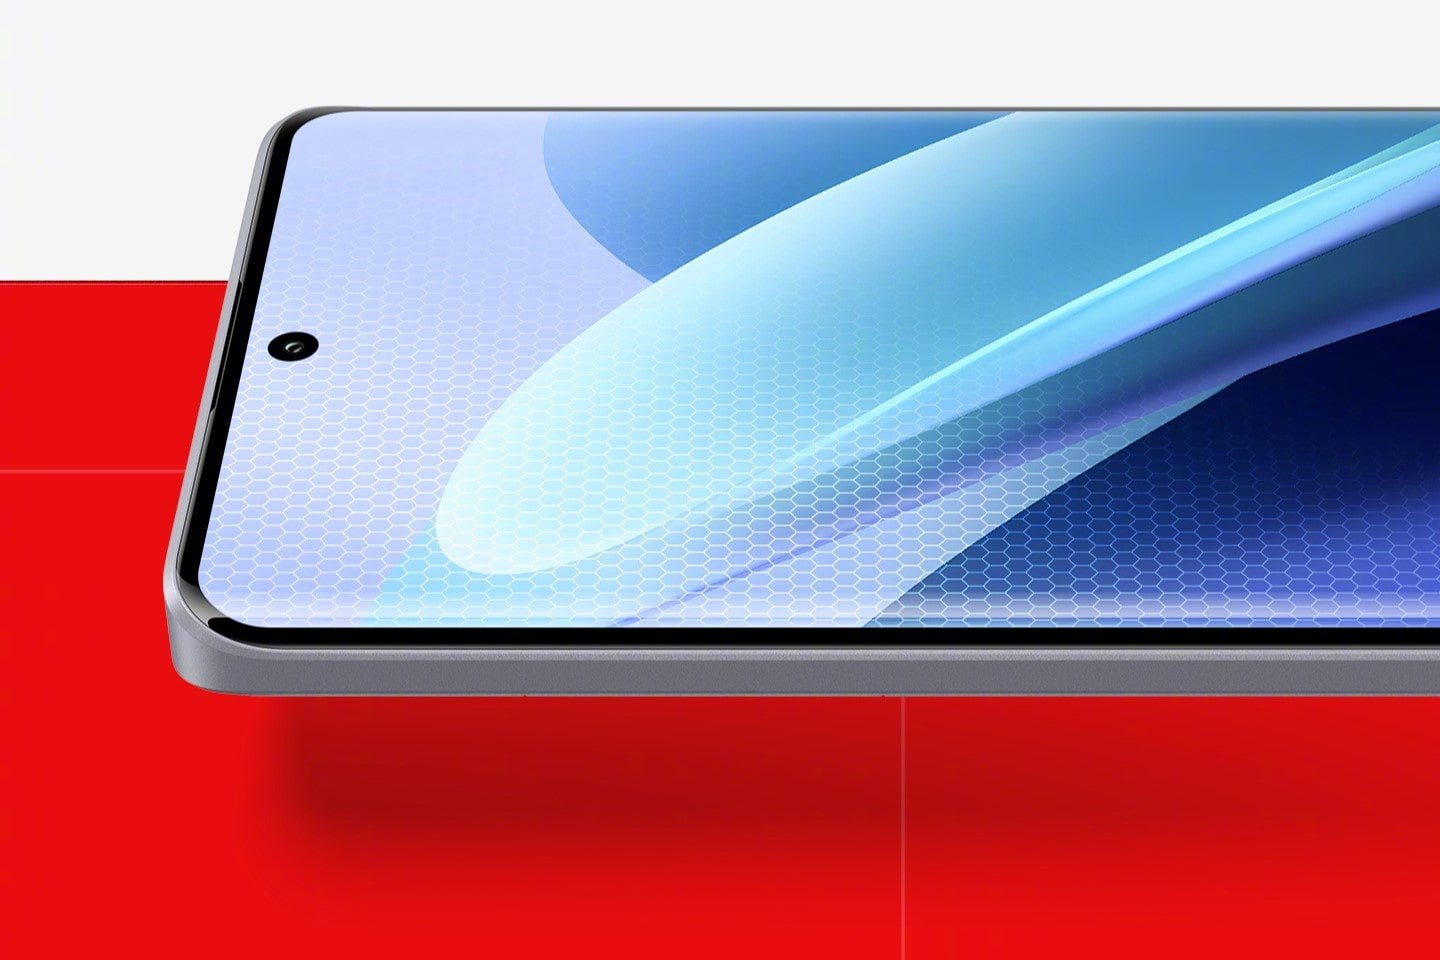 Redmi Note 13 Pro+ tipped to get these features.. Check details